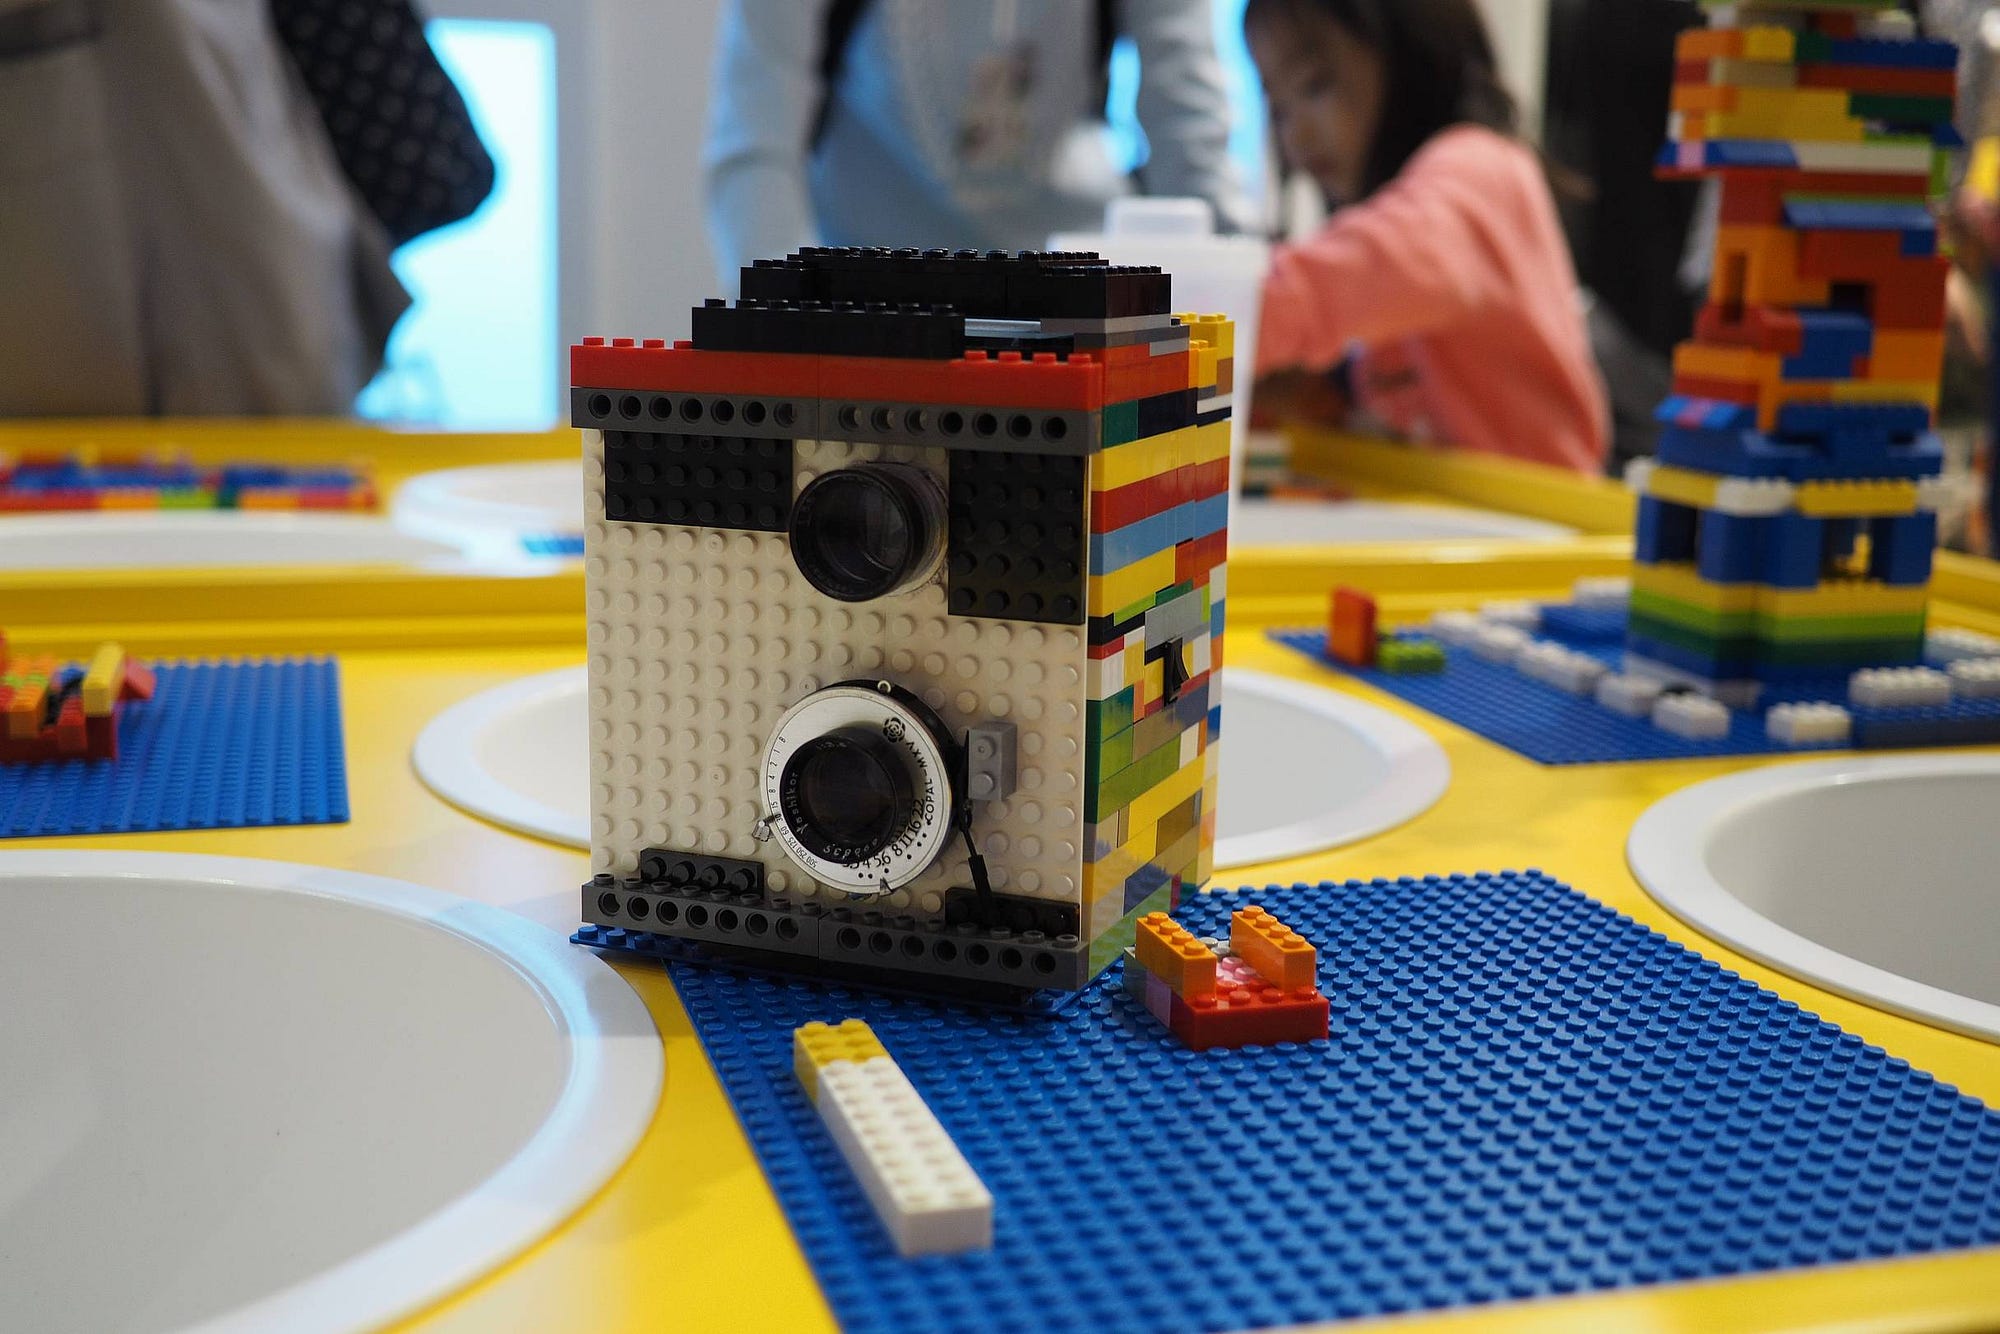 Camera made from one tiny Lego brick actually works - CNET